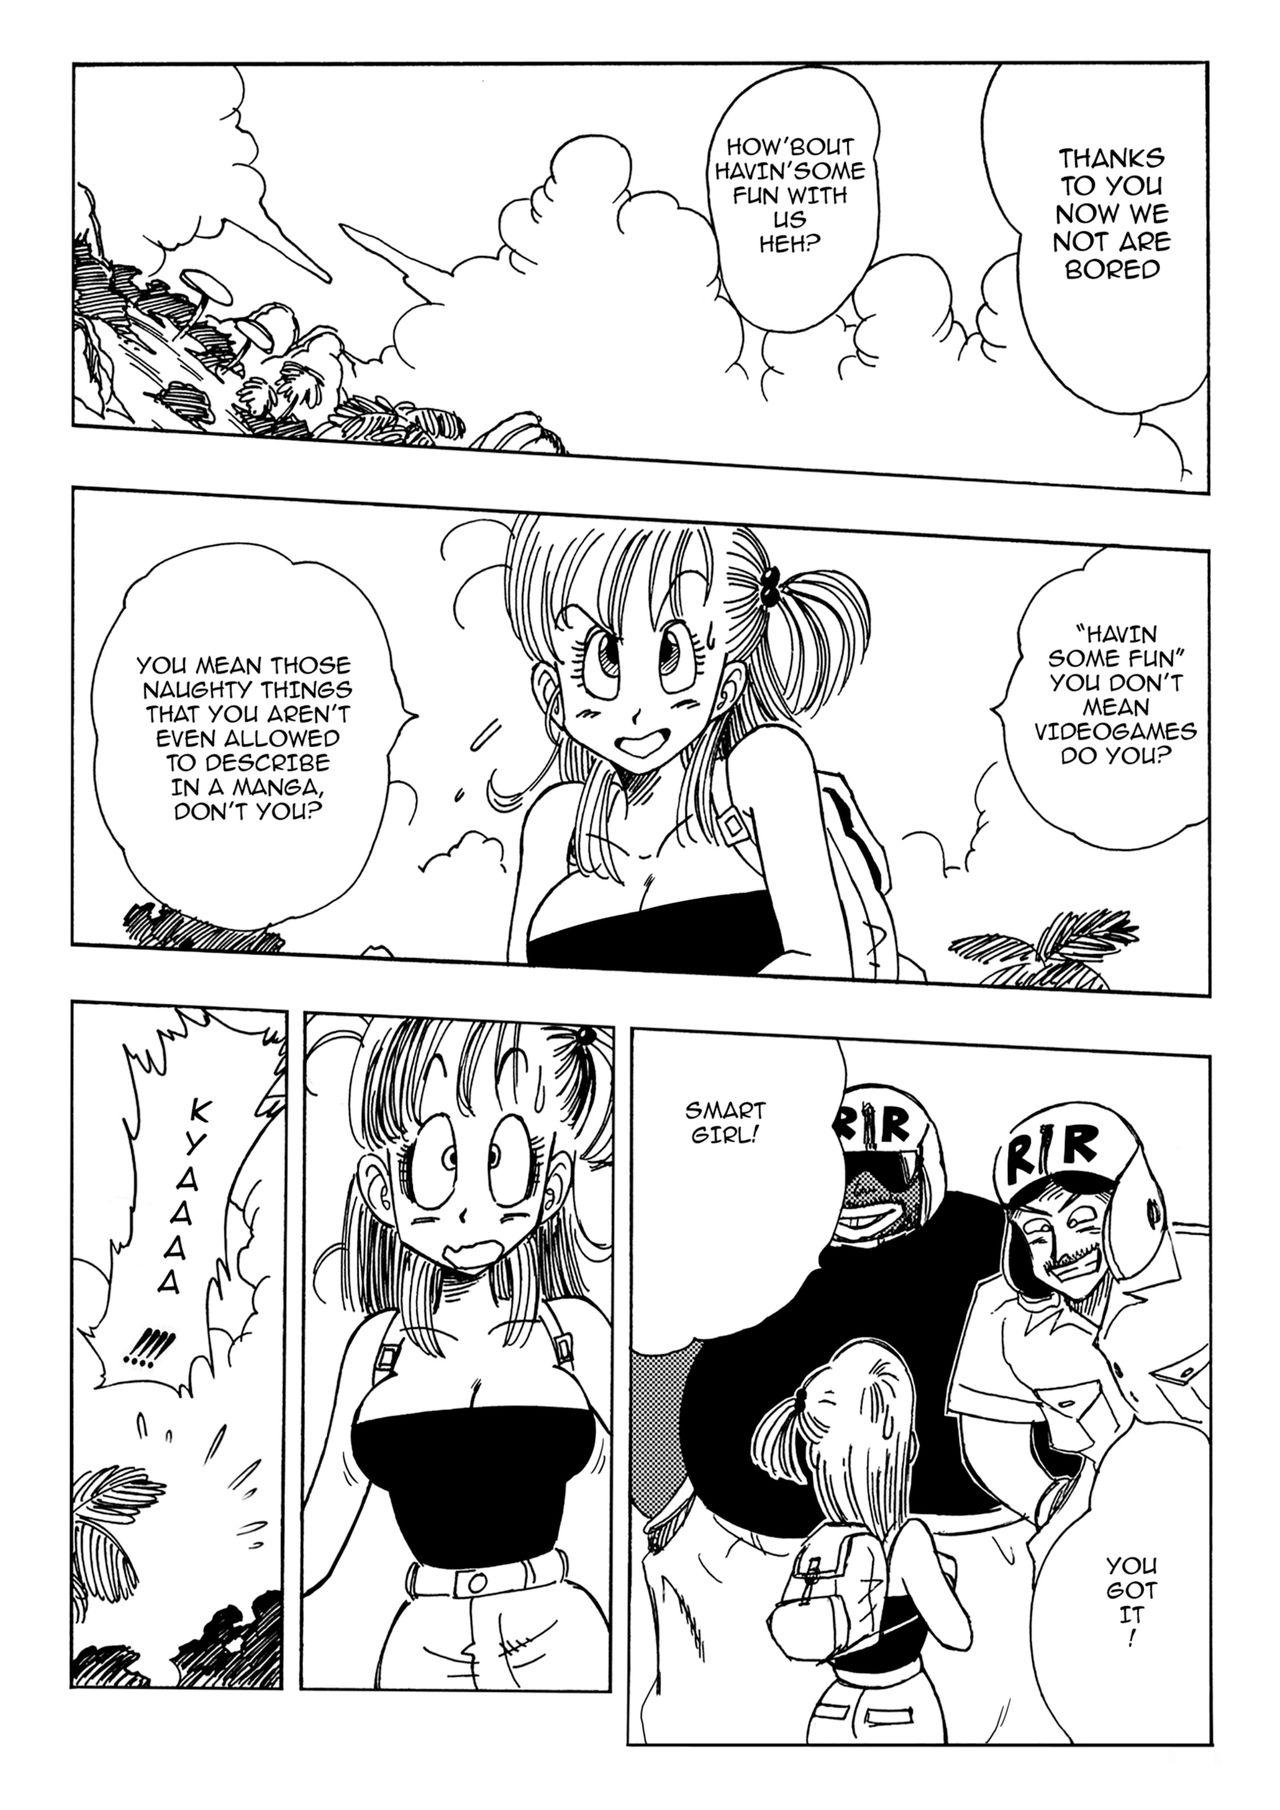 Real Orgasms Bulma and Friends - Dragon ball Hot Girl Pussy - Page 3